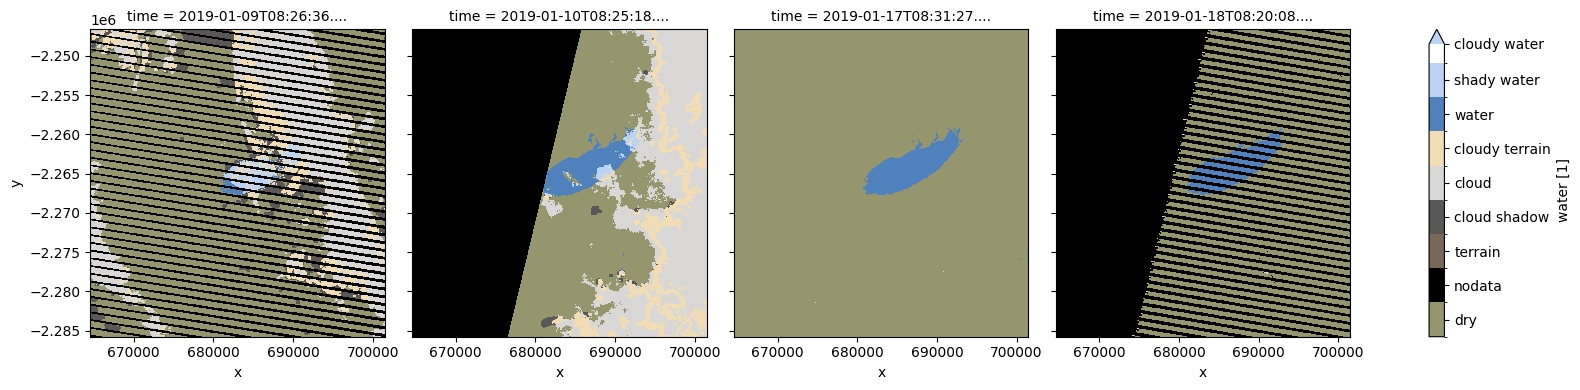 ../../../_images/sandbox_notebooks_Datasets_Water_Observations_from_Space_19_0.png